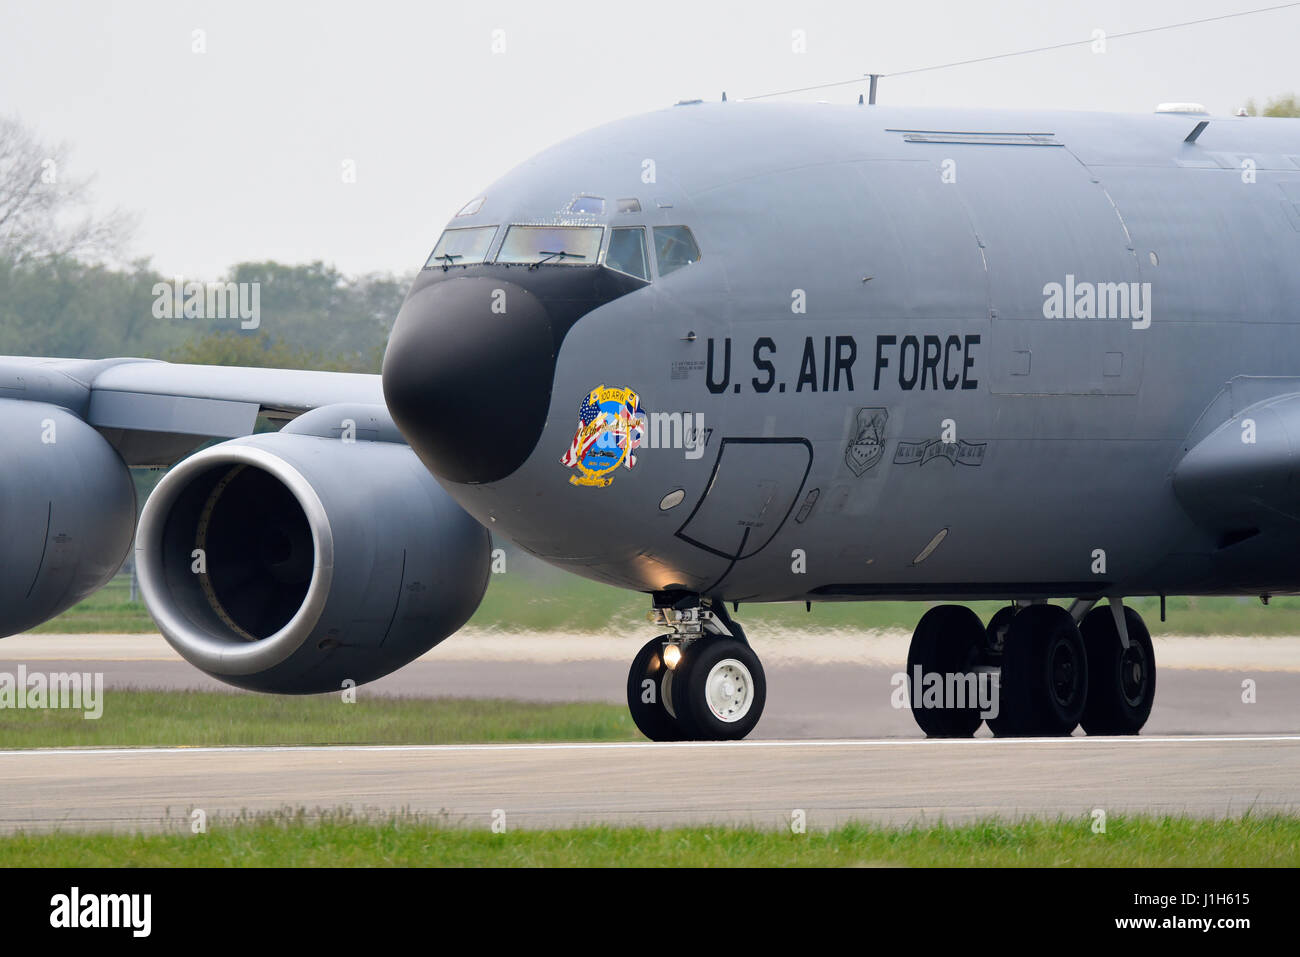 United States Air Force Boeing KC-135 Stratotanker tanker Aircraft del 100th Air Refueling Wing presso RAF Mildenhall, Suffolk, Regno Unito Foto Stock